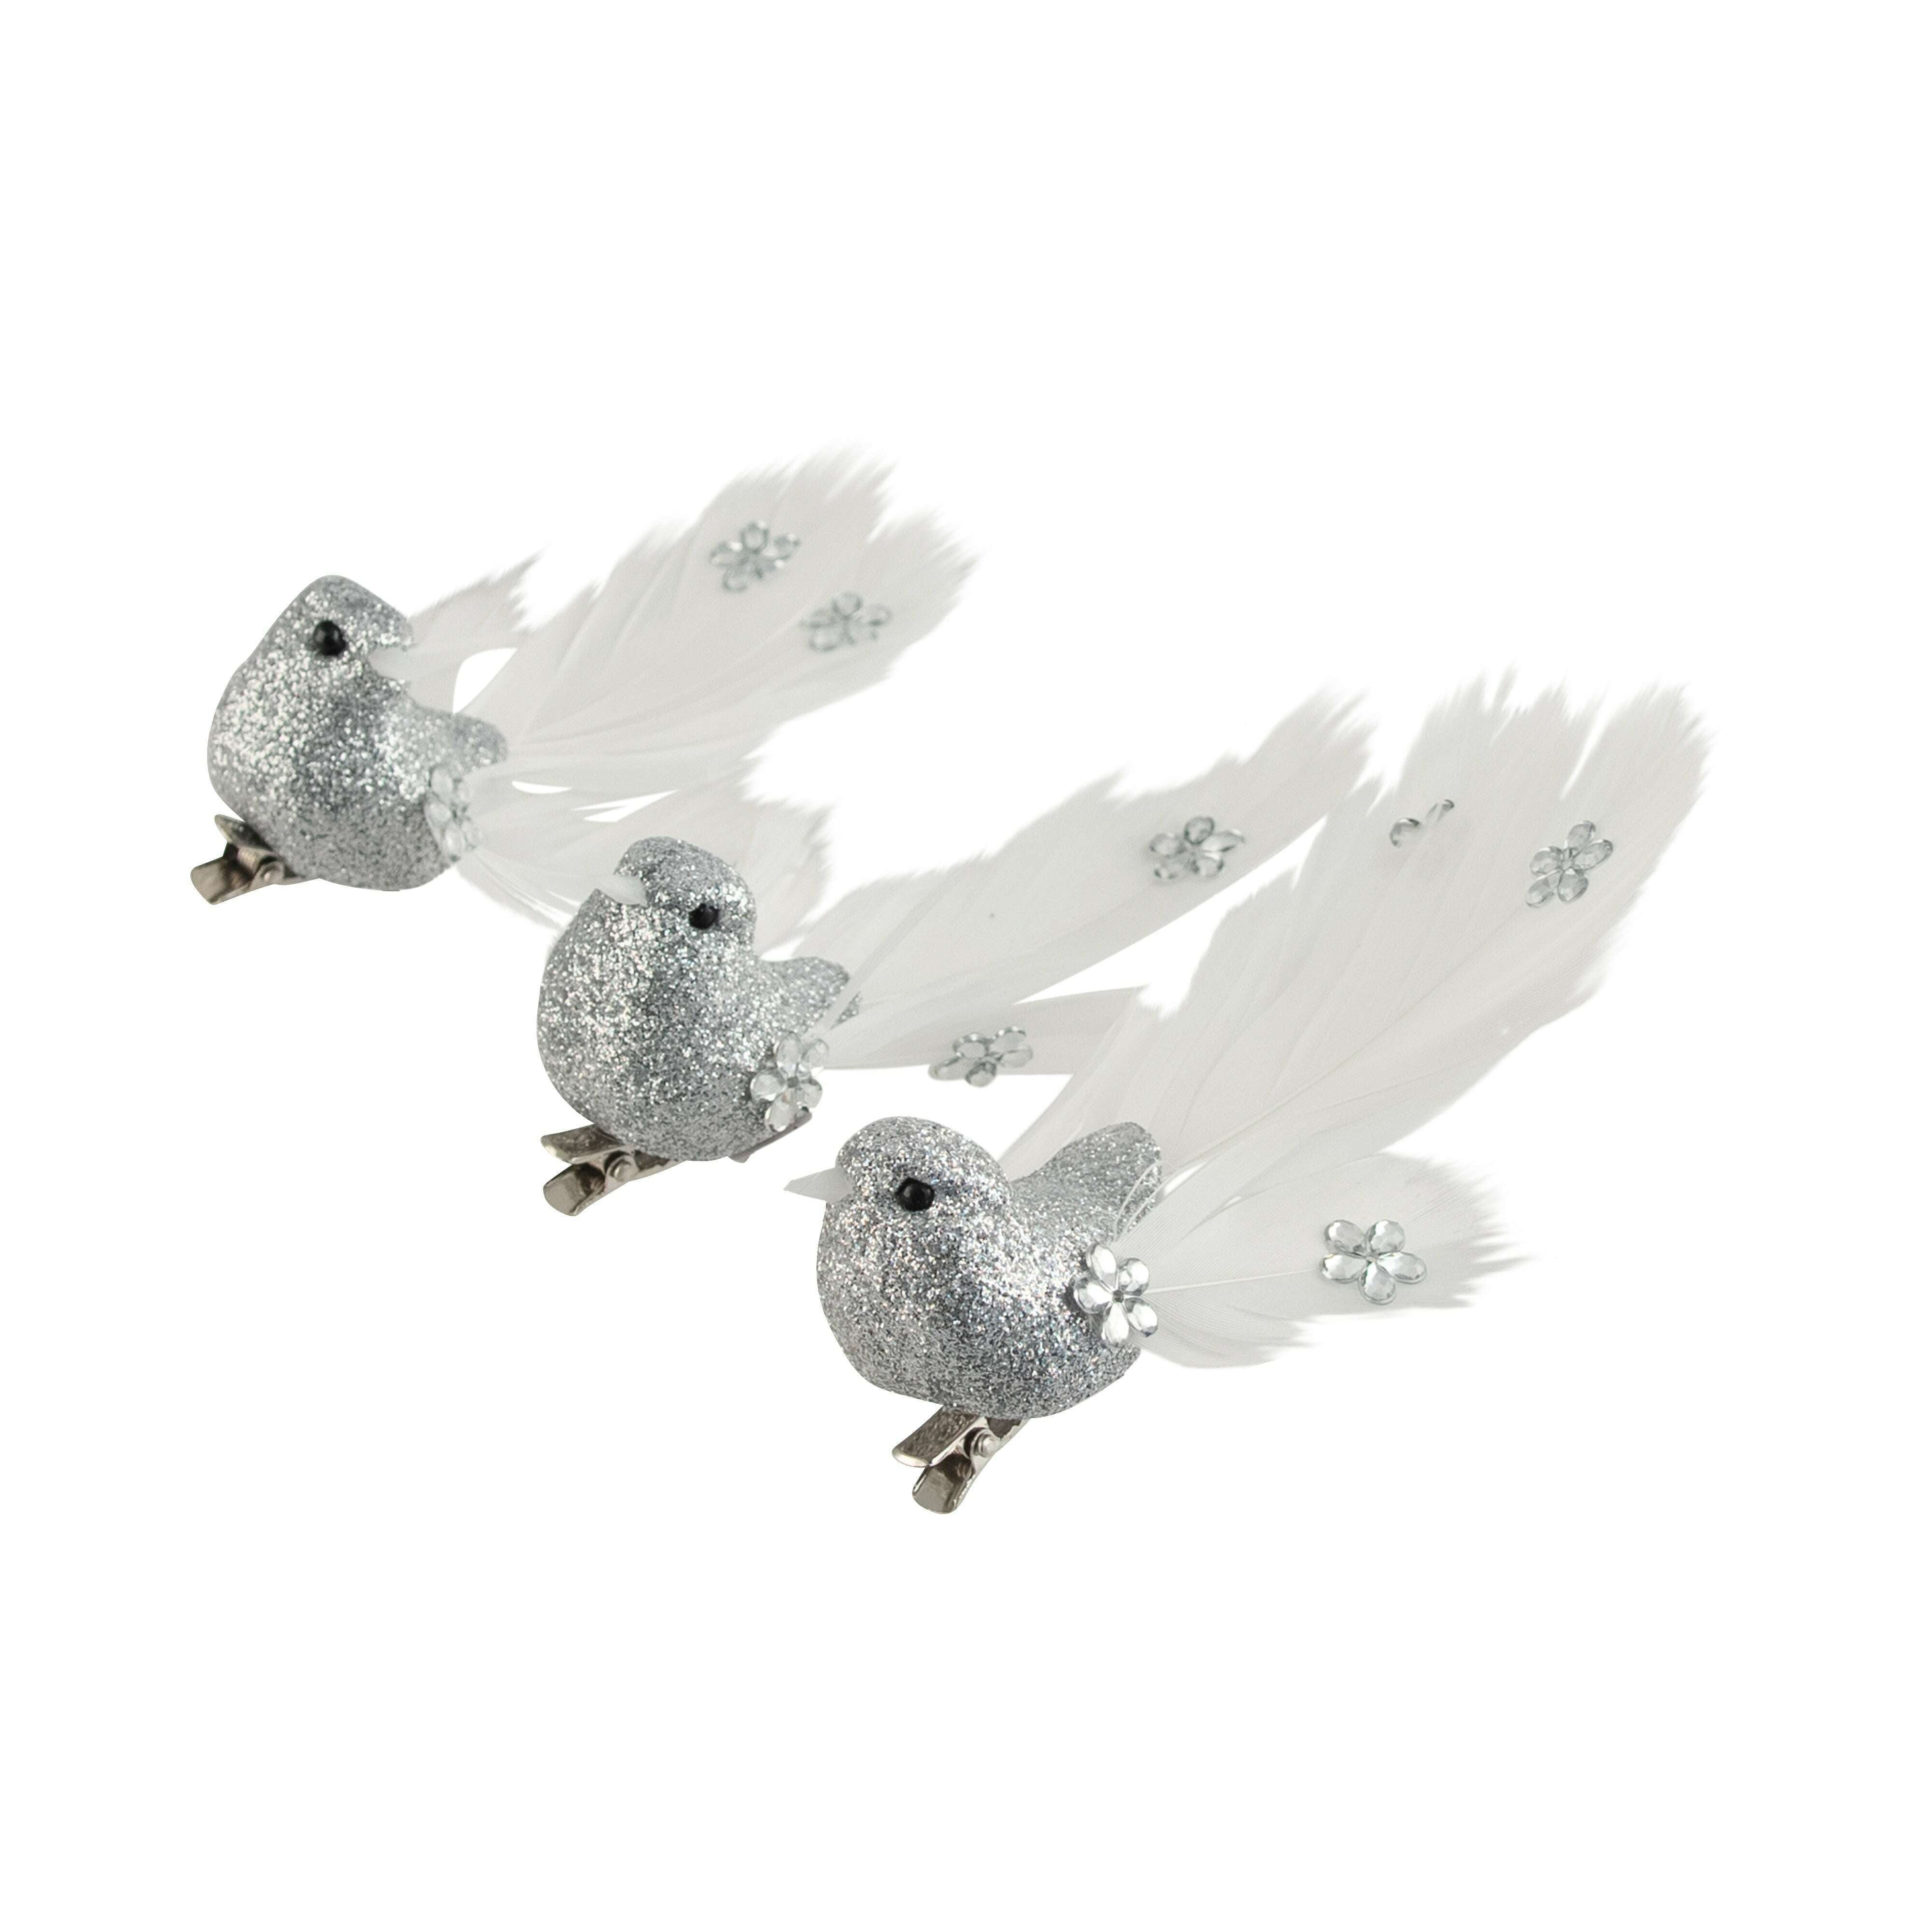 Impodimo Living & Giving:Clip on Bird - Feather Silver Jewel:Swing Gifts